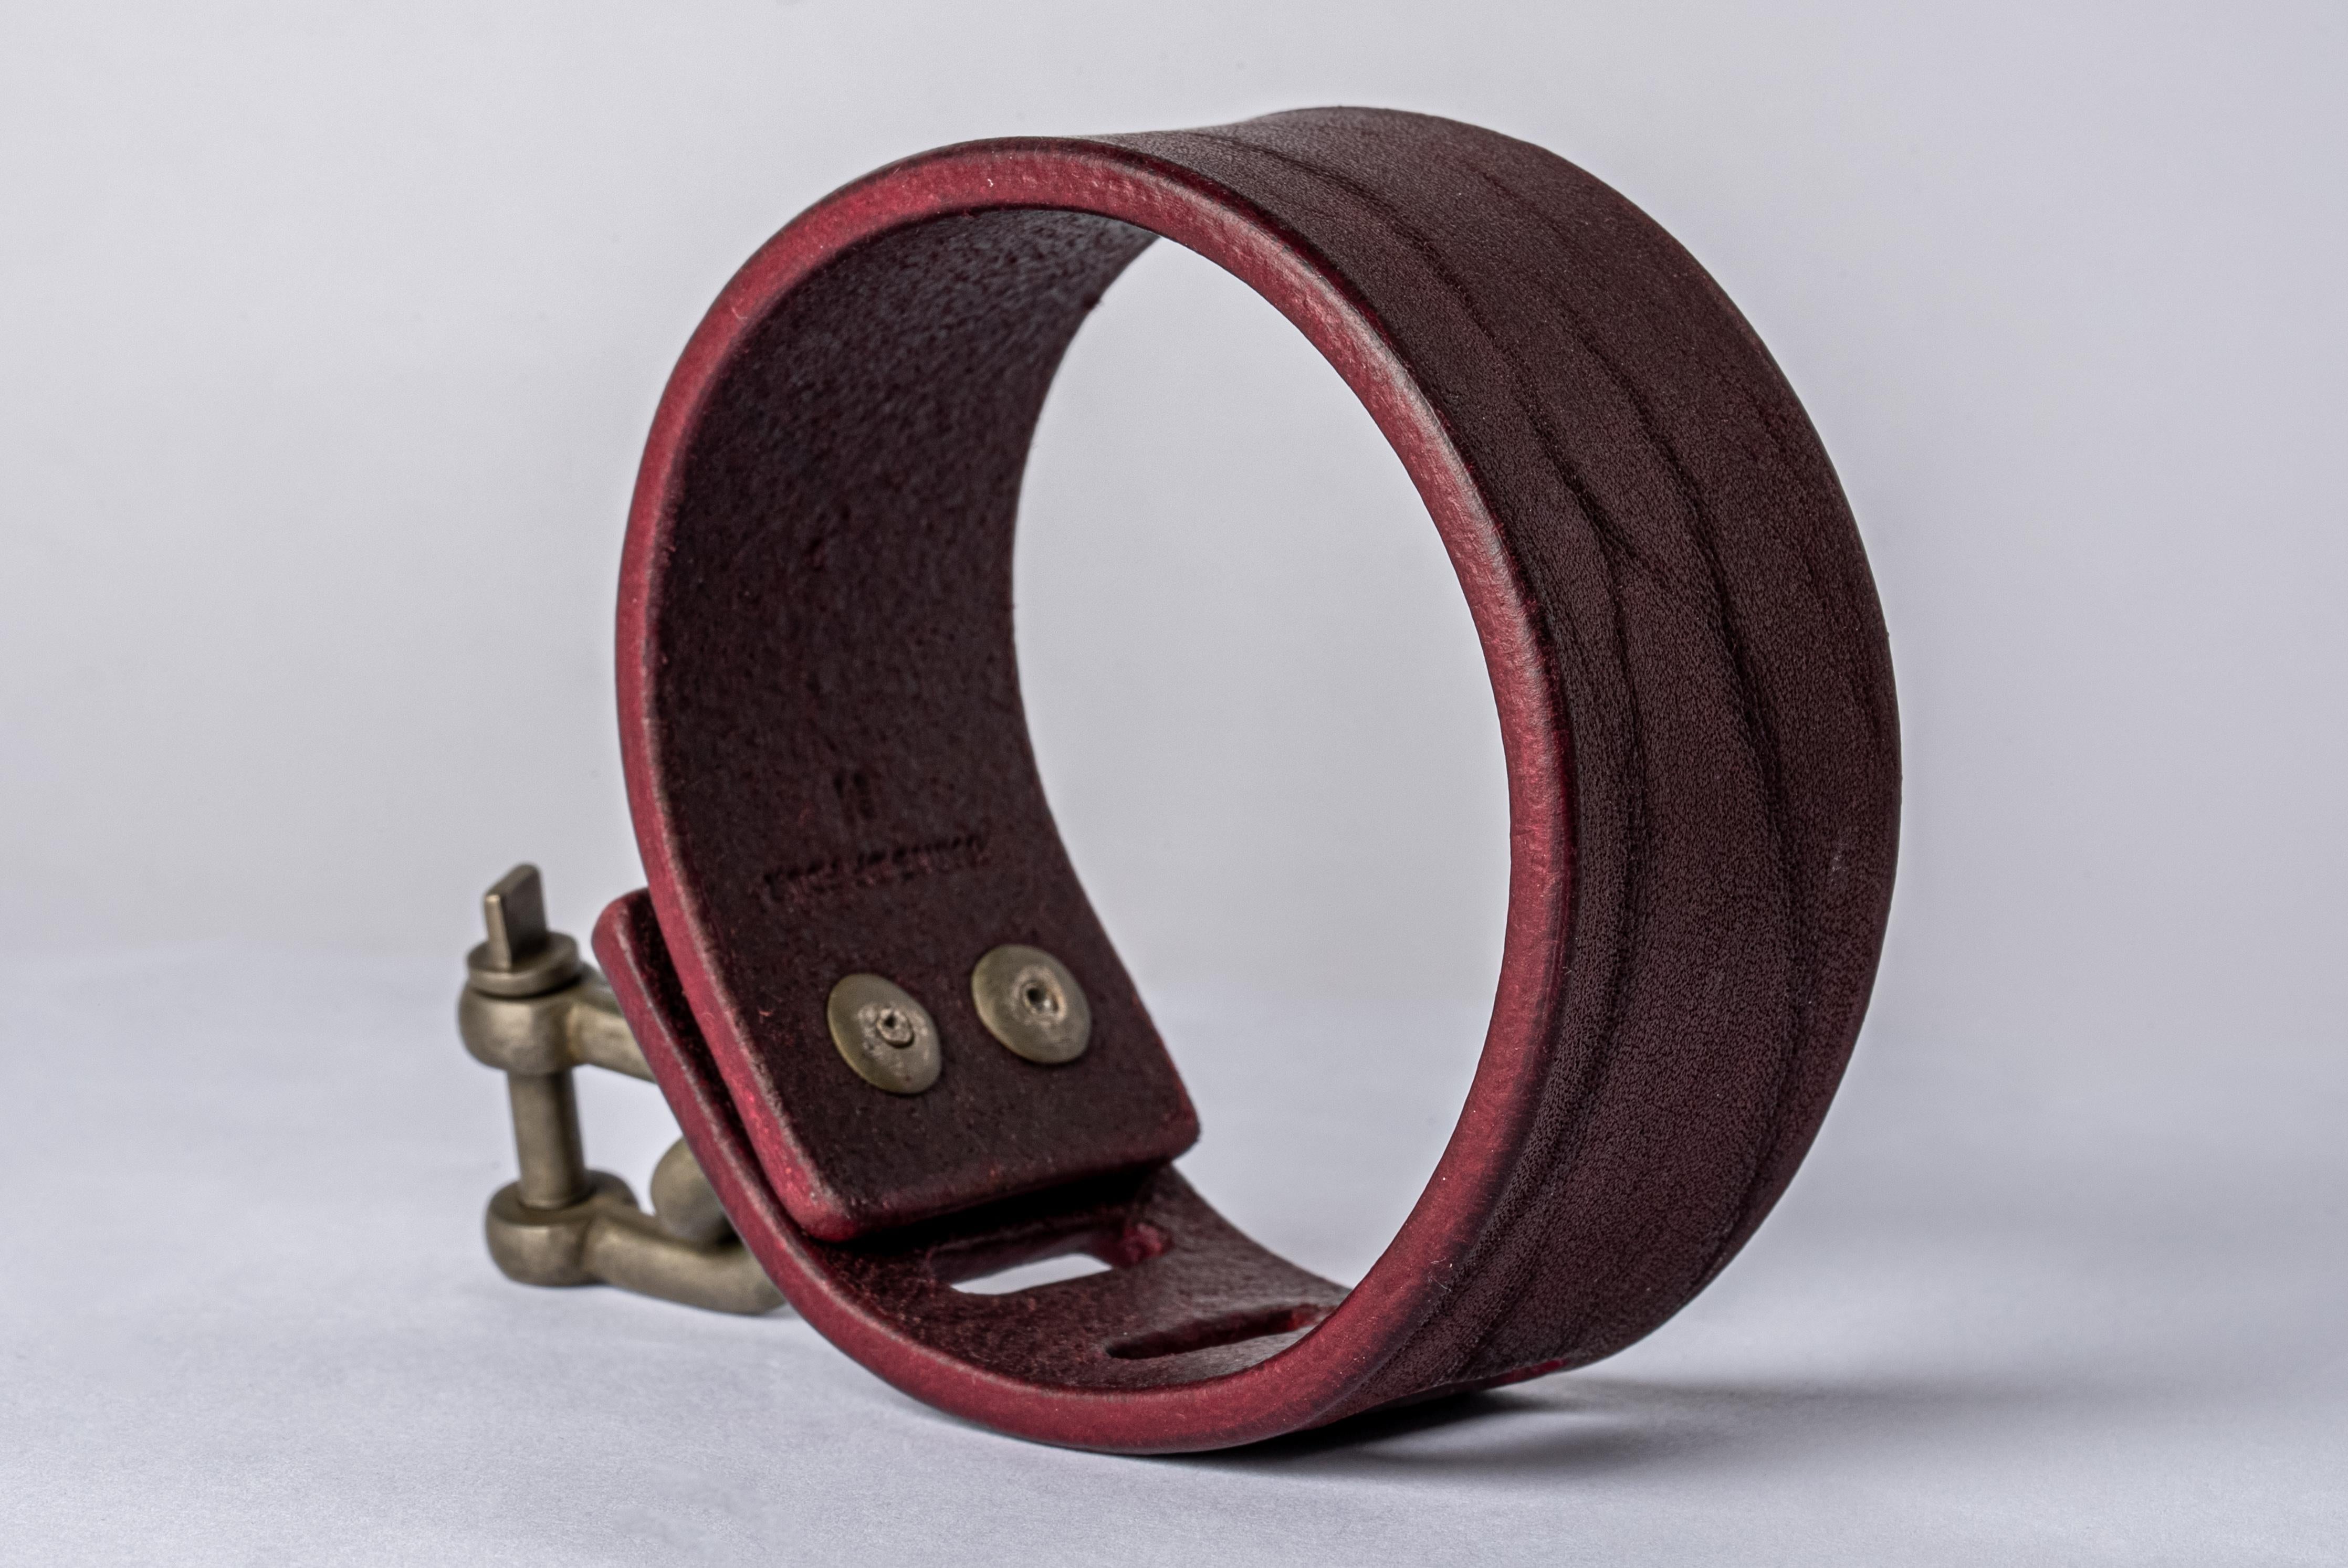 Bracelet in wine buffalo leather and dirty white bronze. Items with the potential use as restraints. All P4X hardware and accessories are compatible and interchangeable. The Charm System is an interrelated group of products that can be mixed and